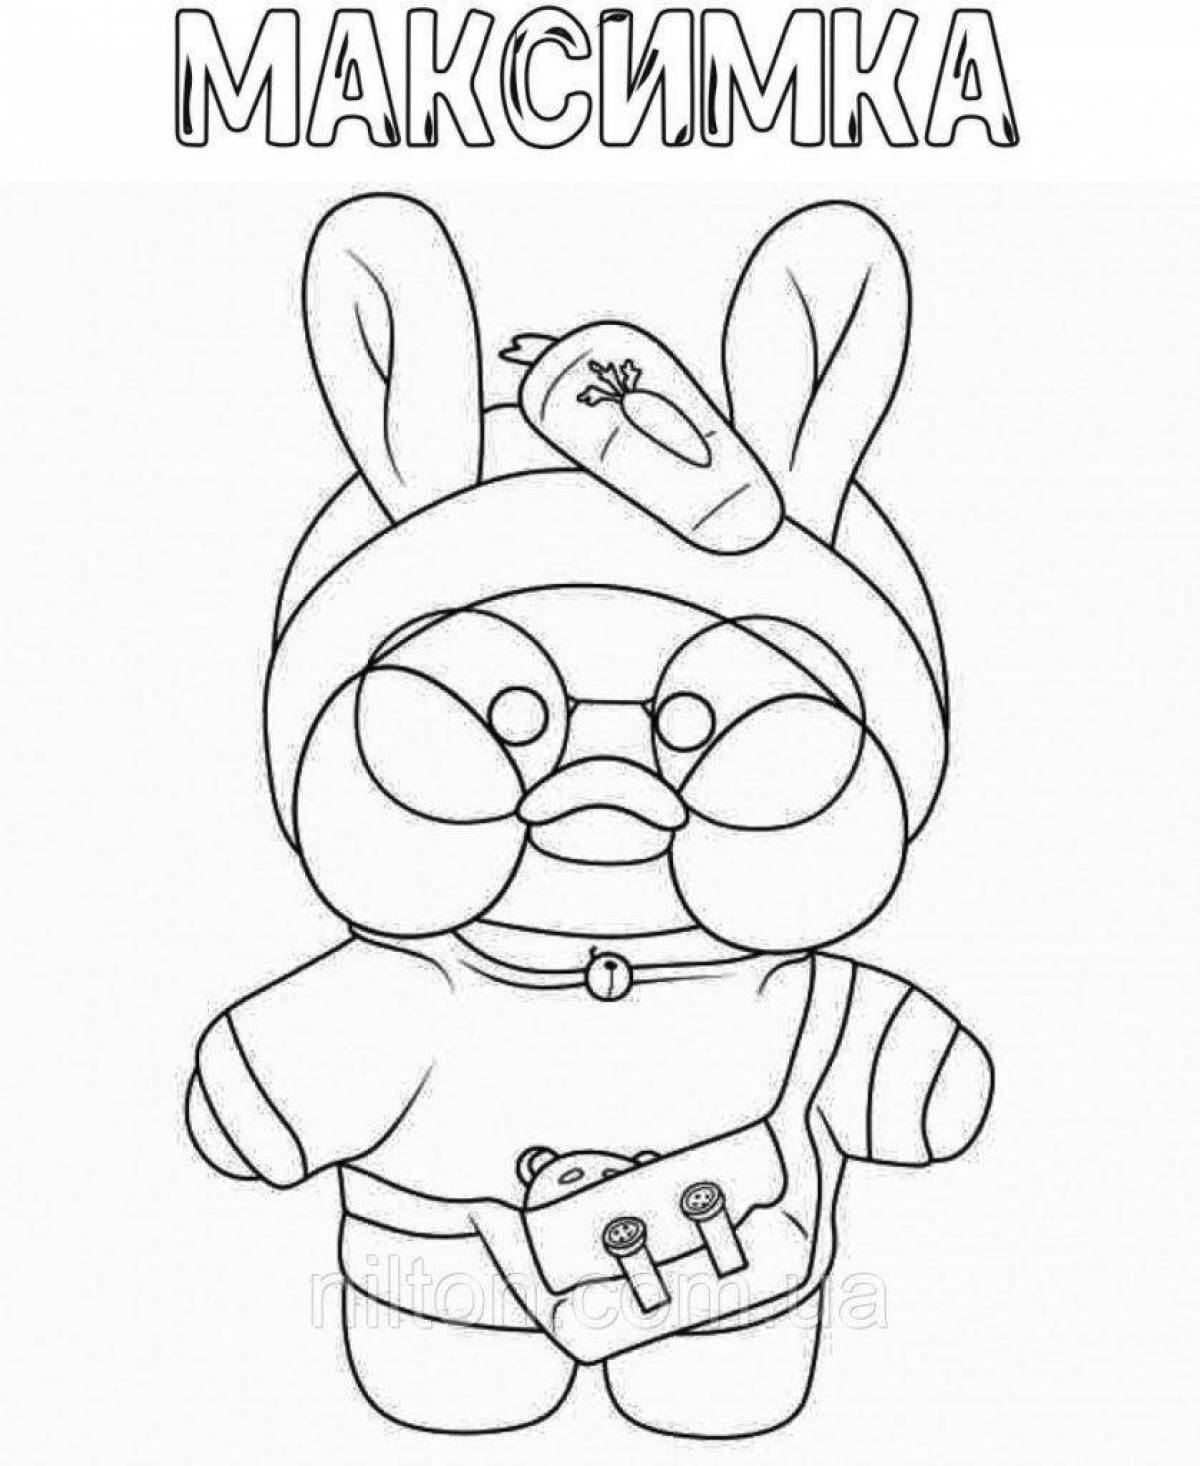 Alan Fanfan's colorful coloring page